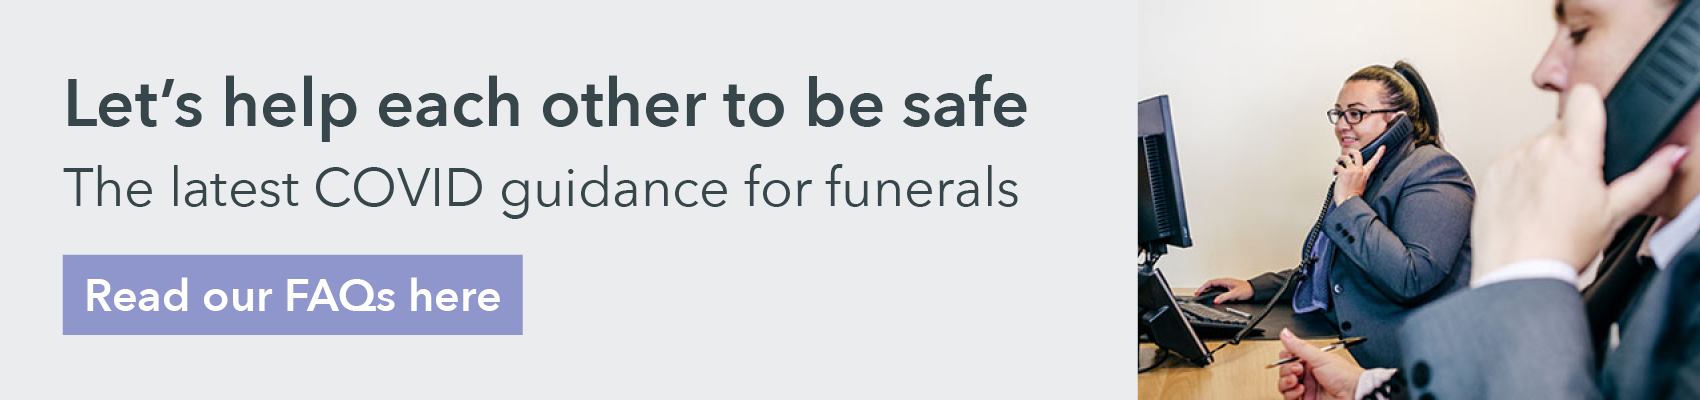 The latest COVID funeral guidelines